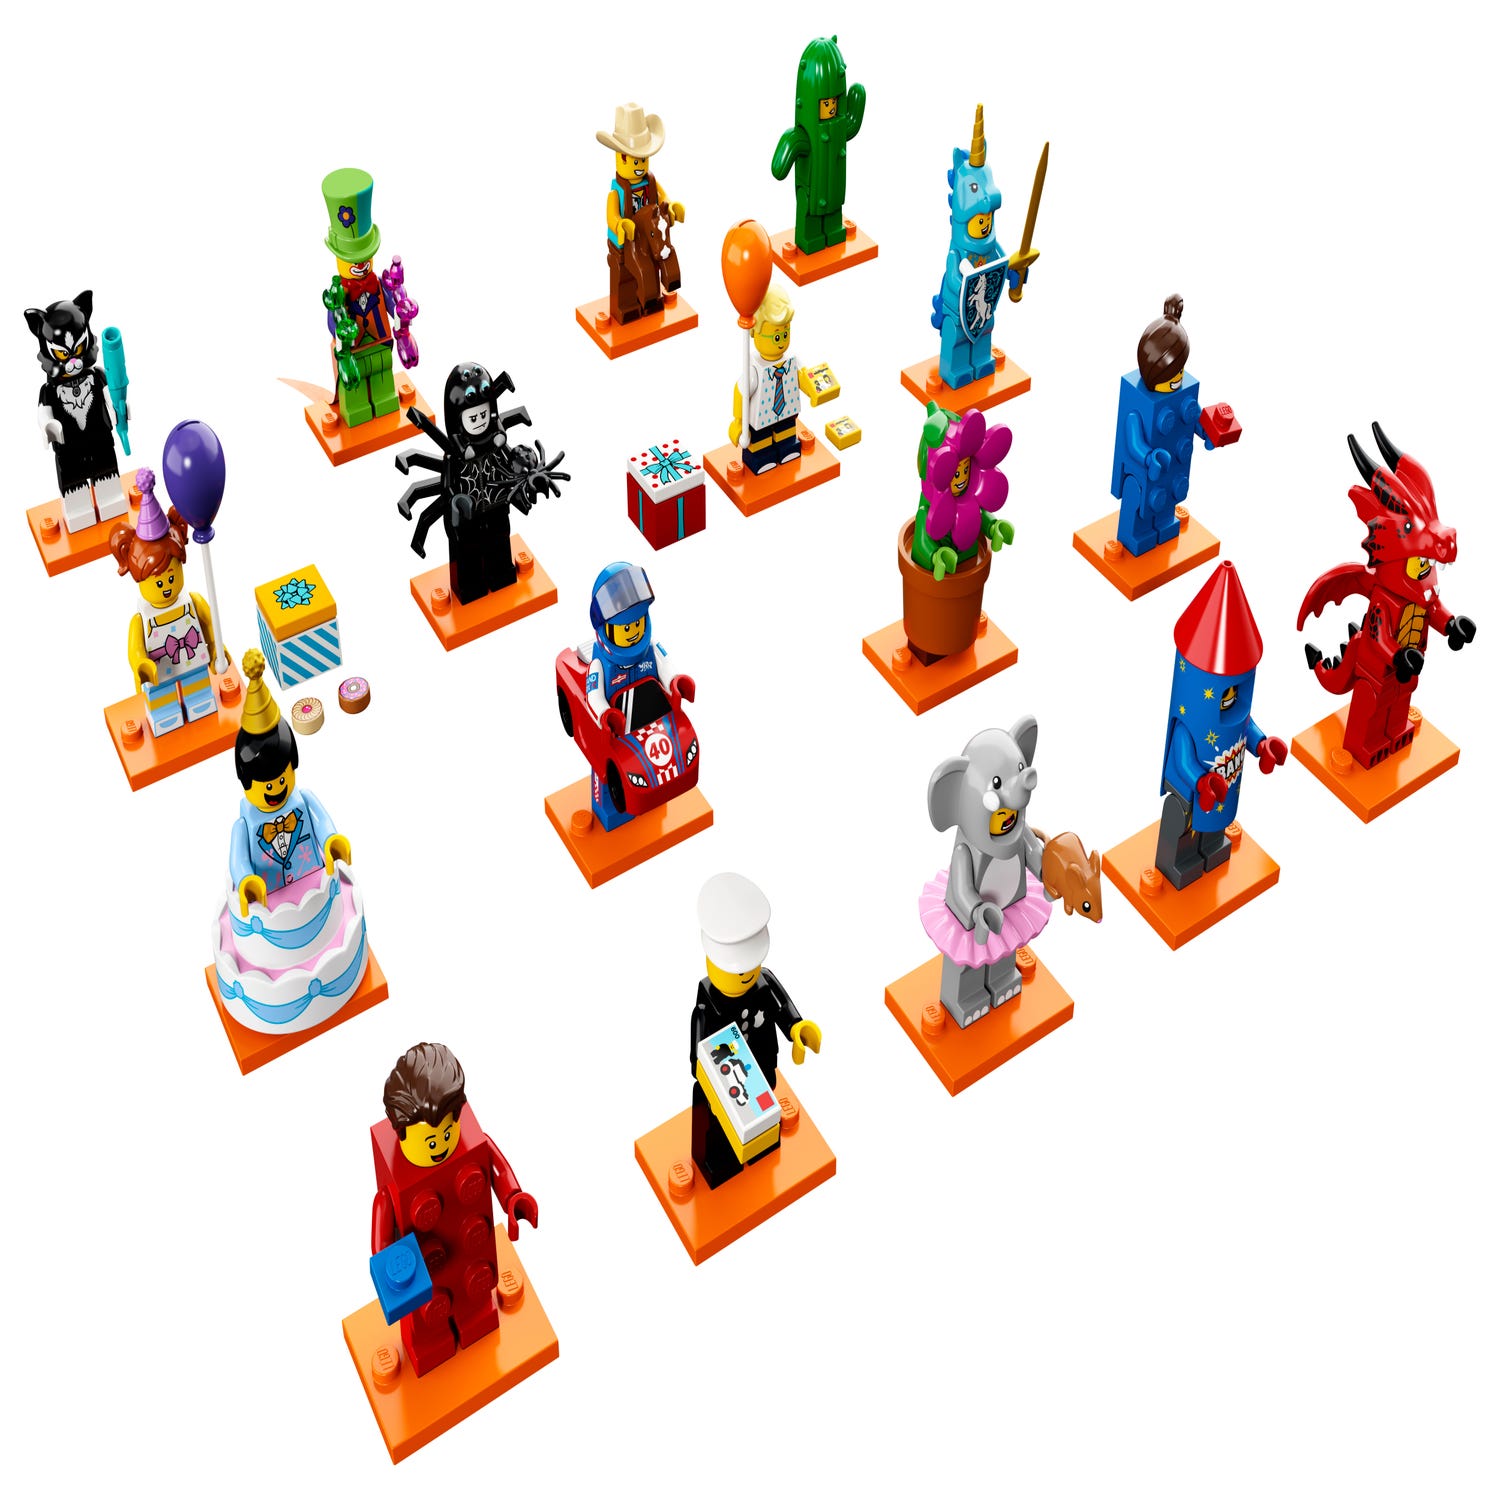 Series 18: Party 71021, Minifigures